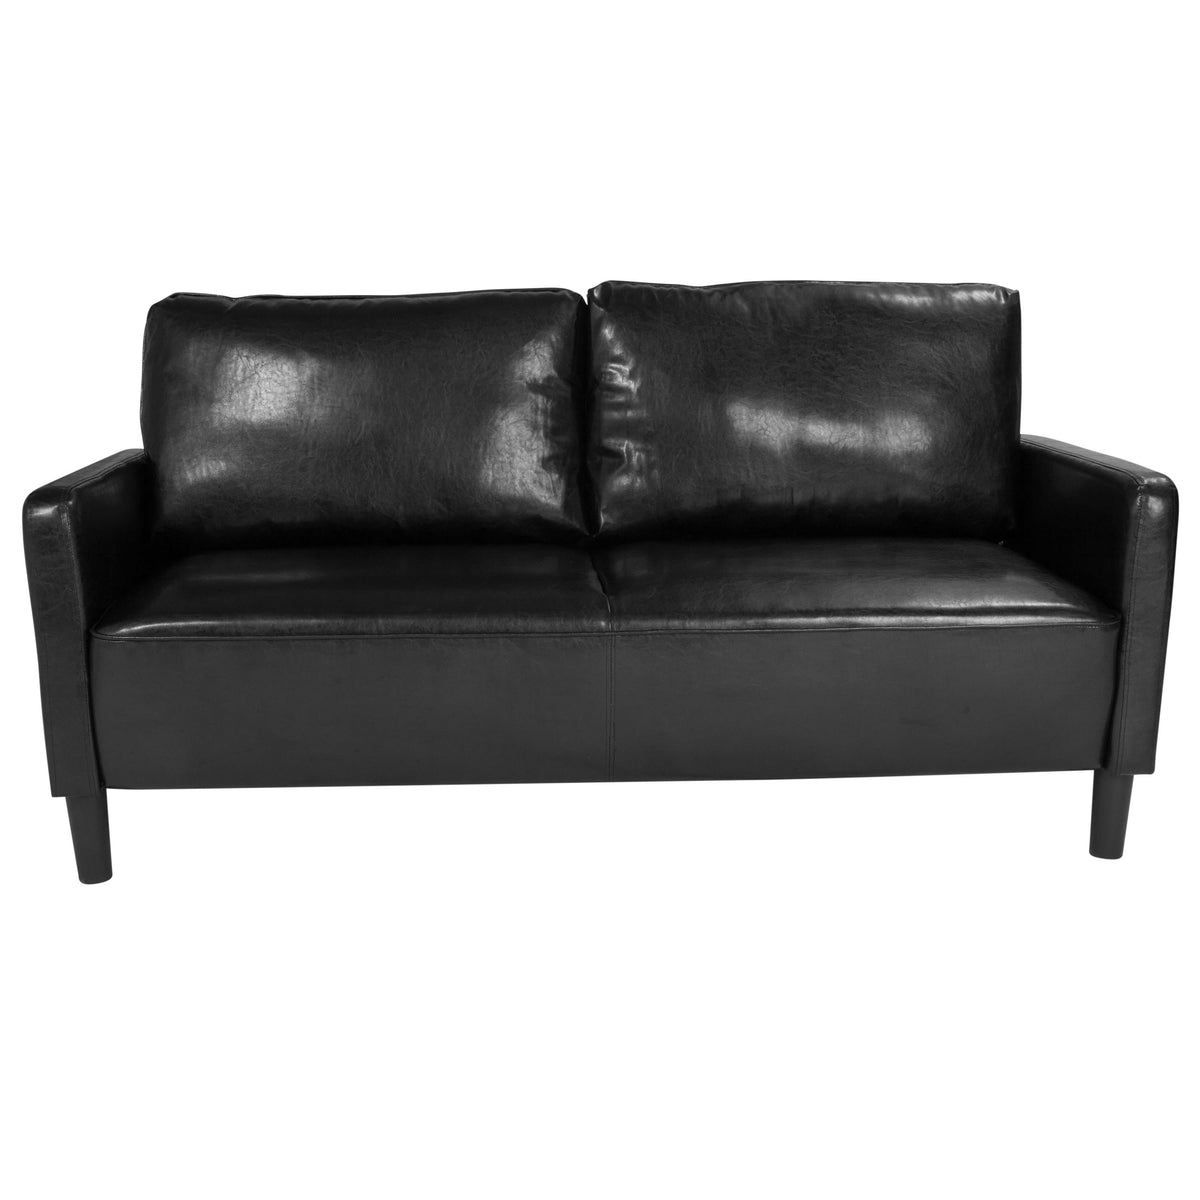 Black LeatherSoft |#| Upholstered Living Room Sofa with Straight Arms in Black LeatherSoft